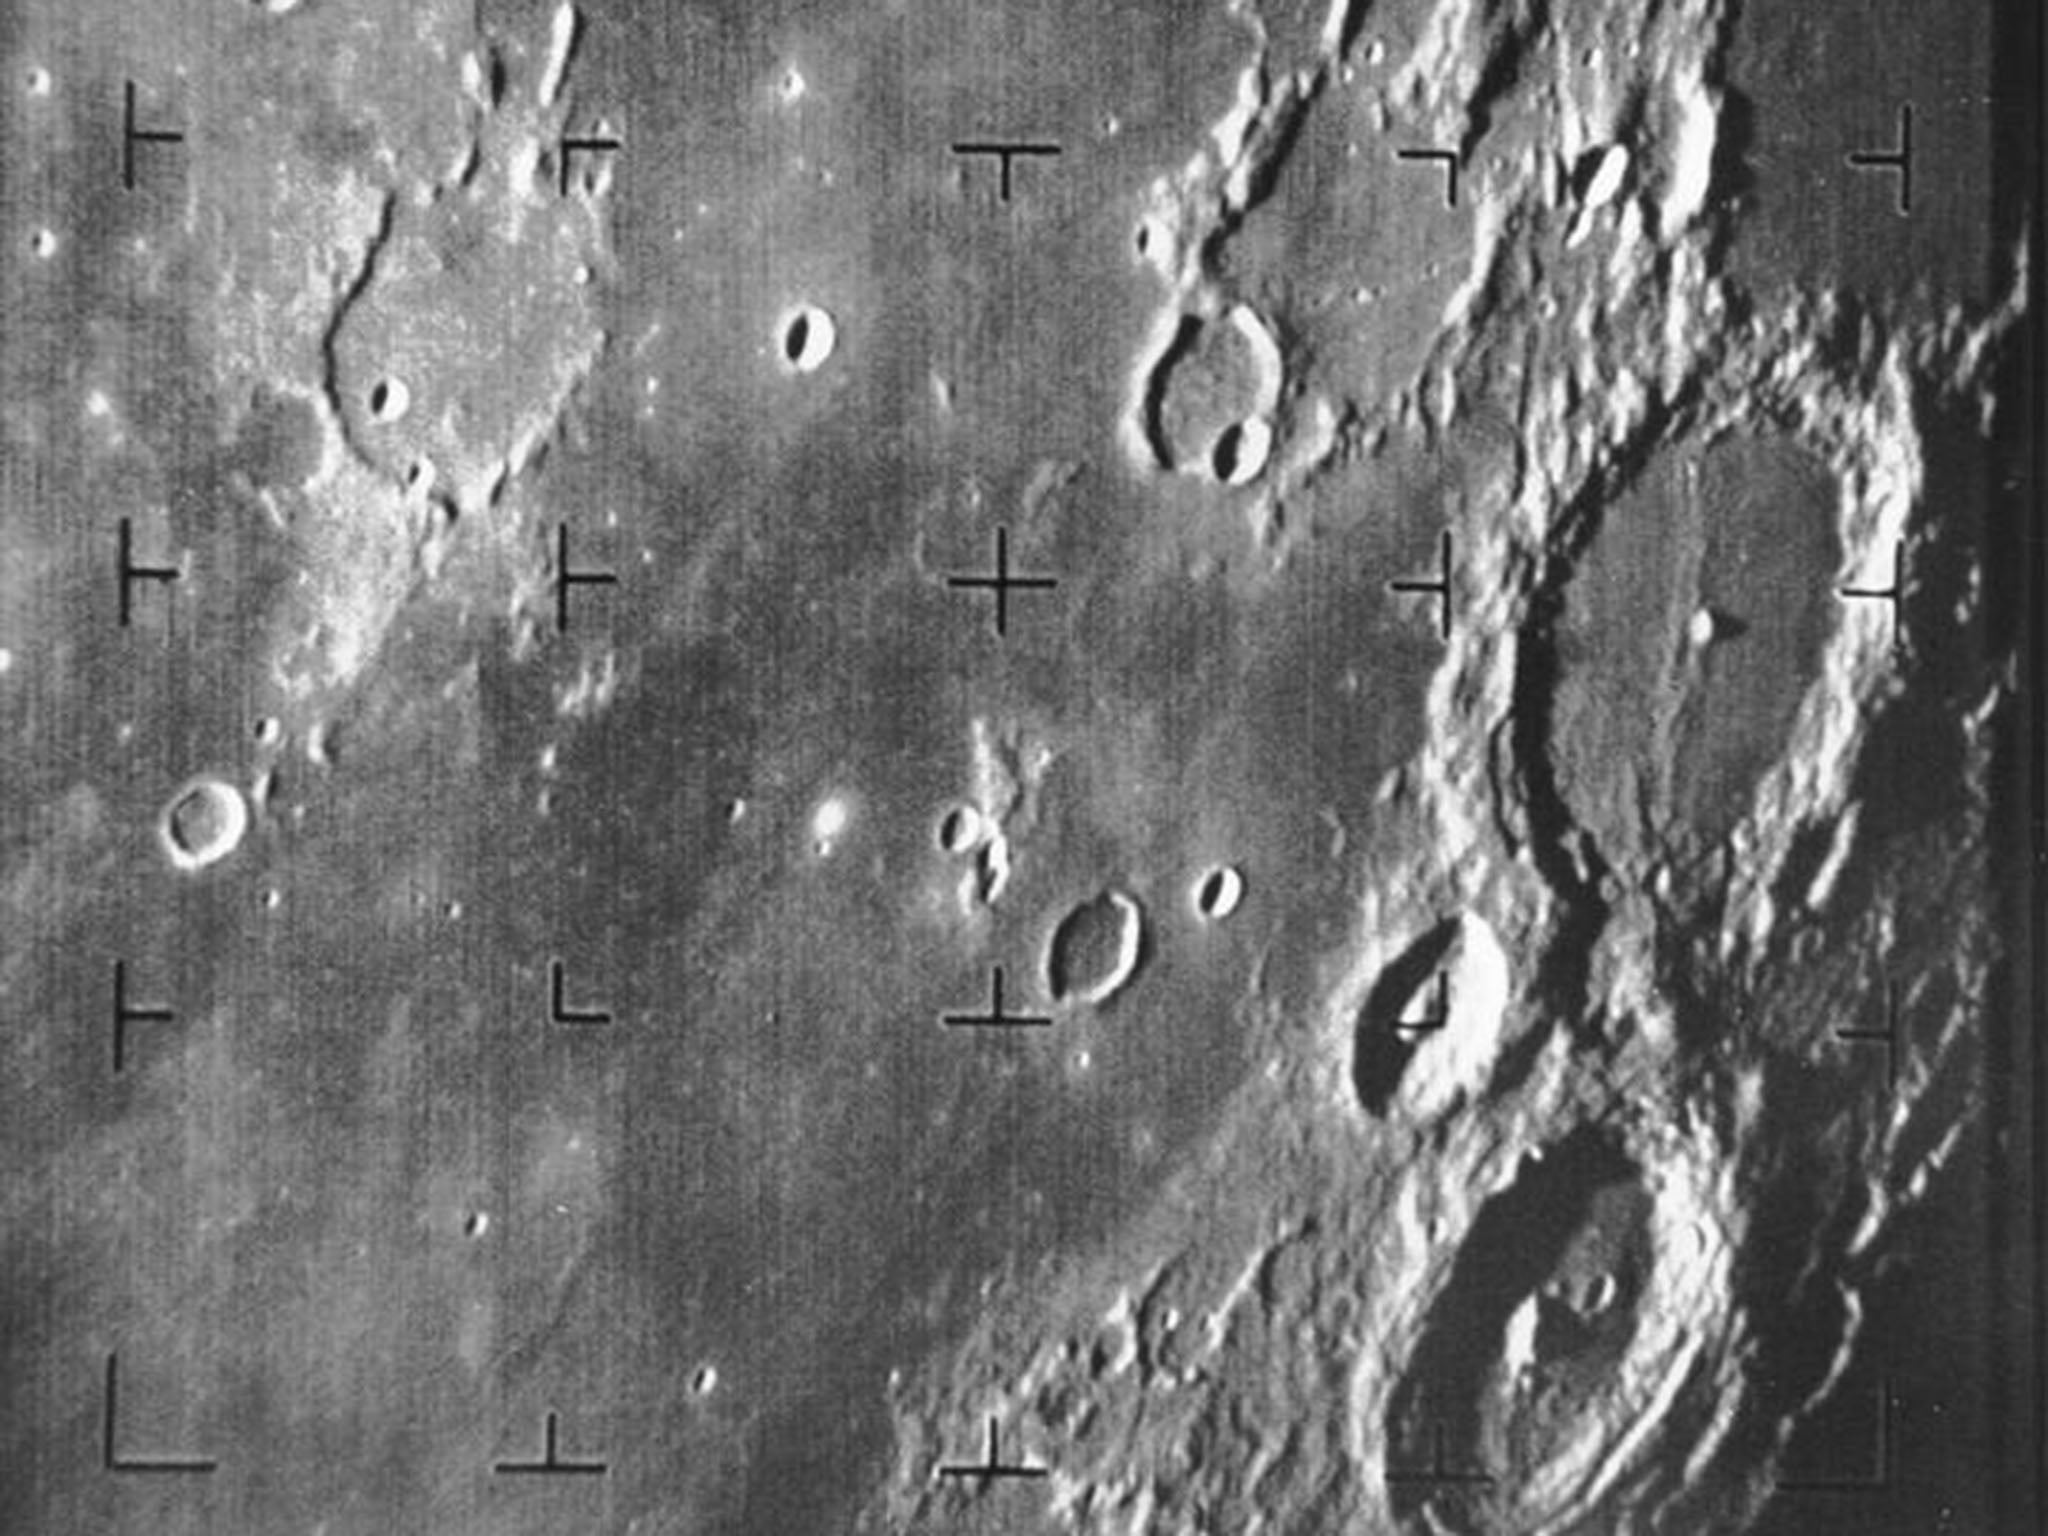 Ranger 7 took the first picture of the Moon by a US spacecraft in 1964